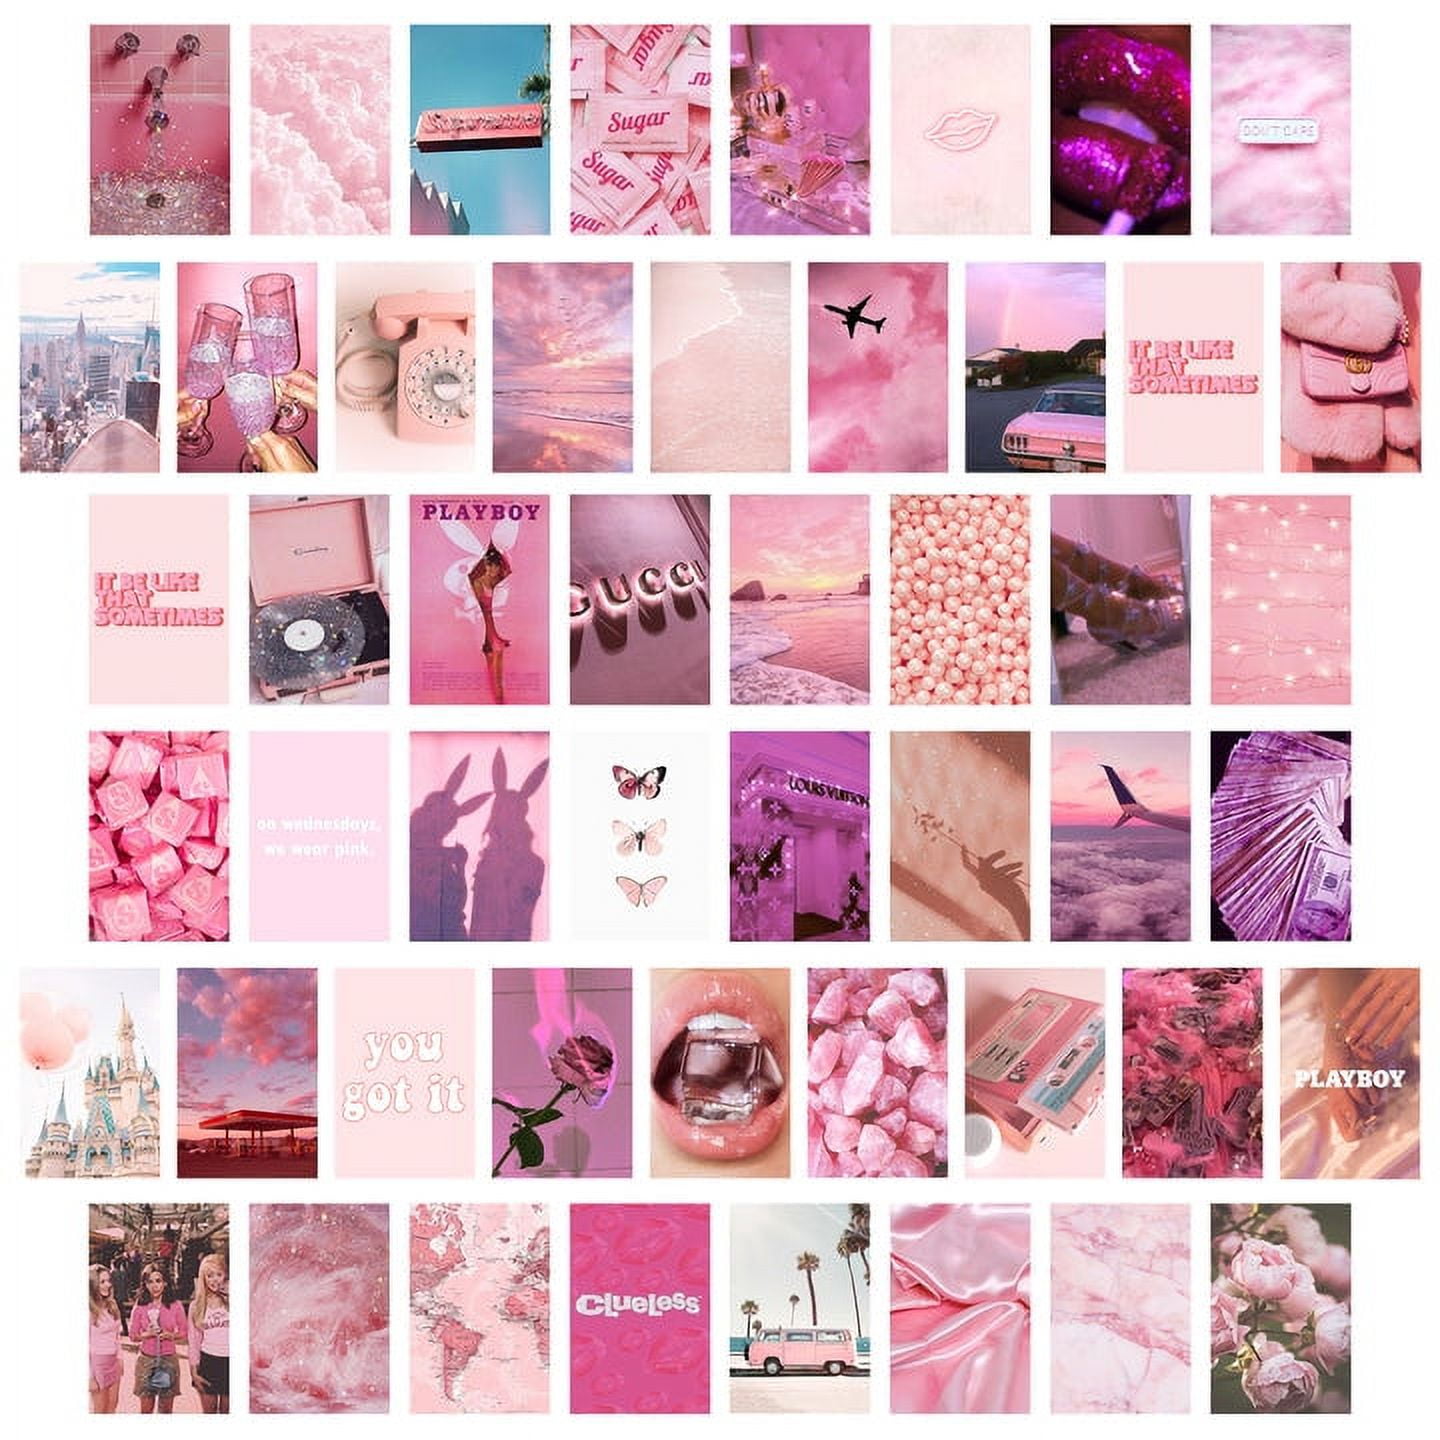 Pink and white Louis Vuitton  Wallpaper, Picture collage wall, White louis  vuitton